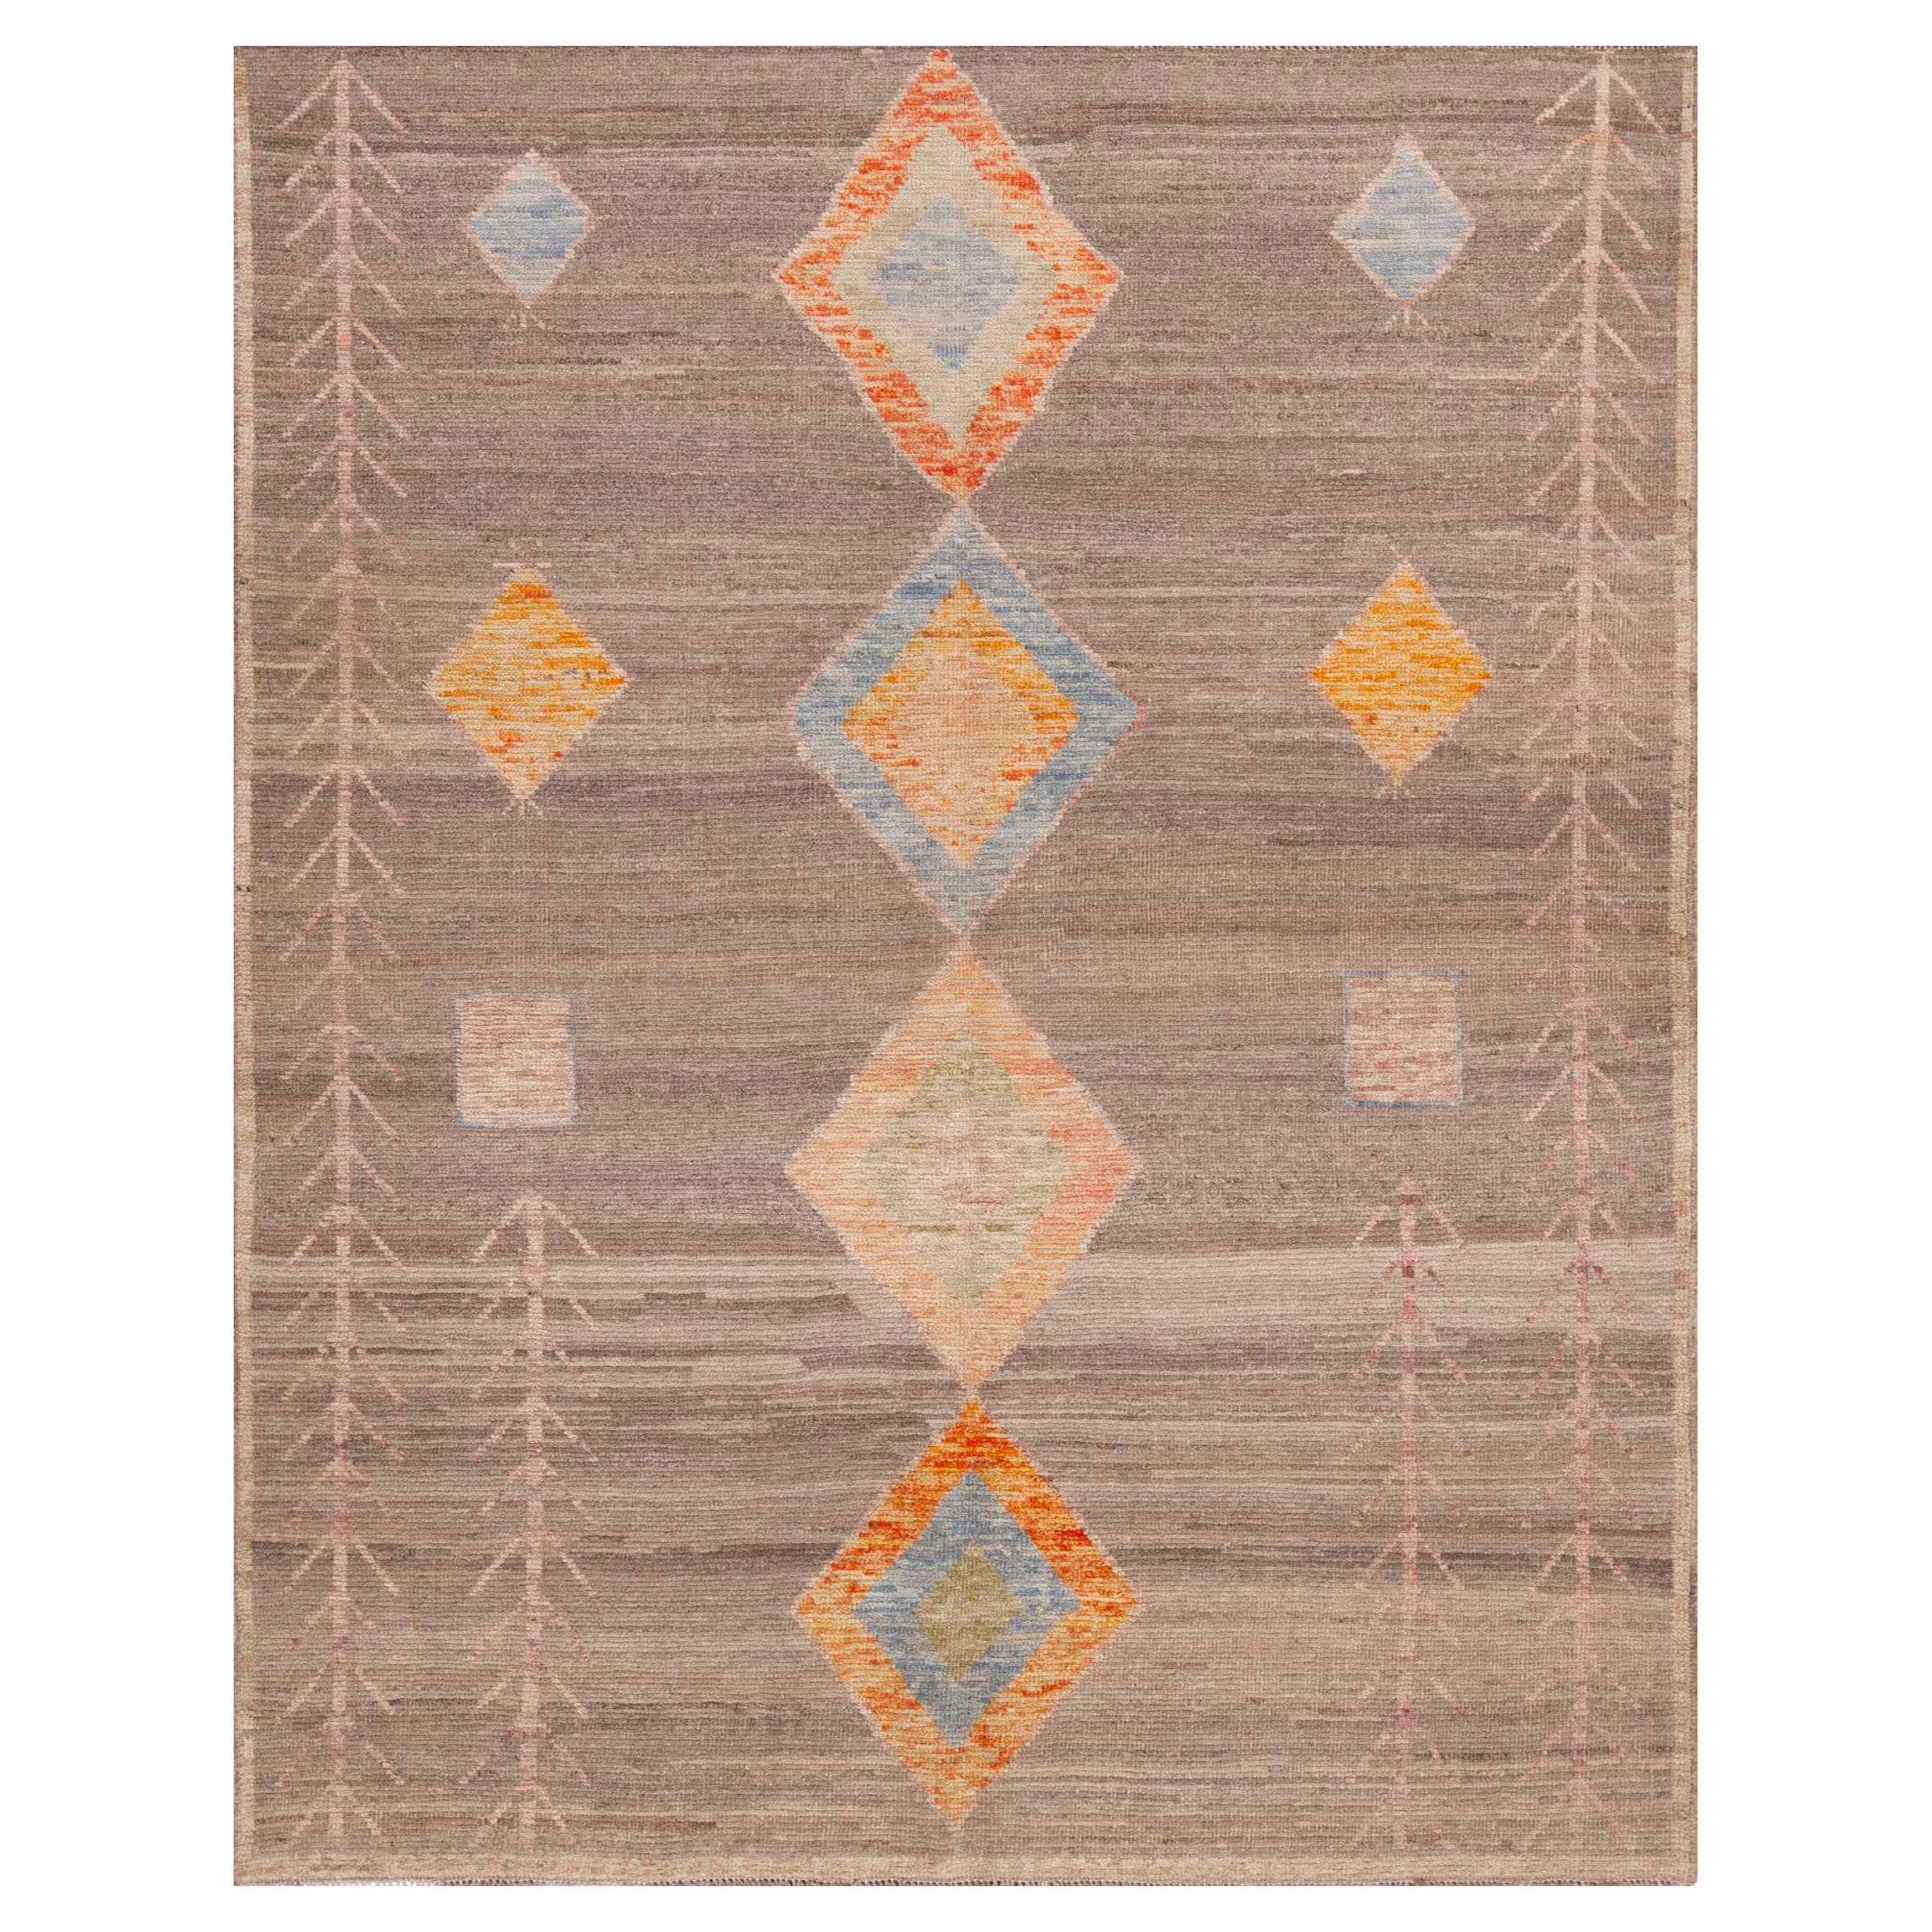 Nazmiyal Collection Modern Small Size Tribal Geometric Area Rug 5'1" x 6'4" For Sale